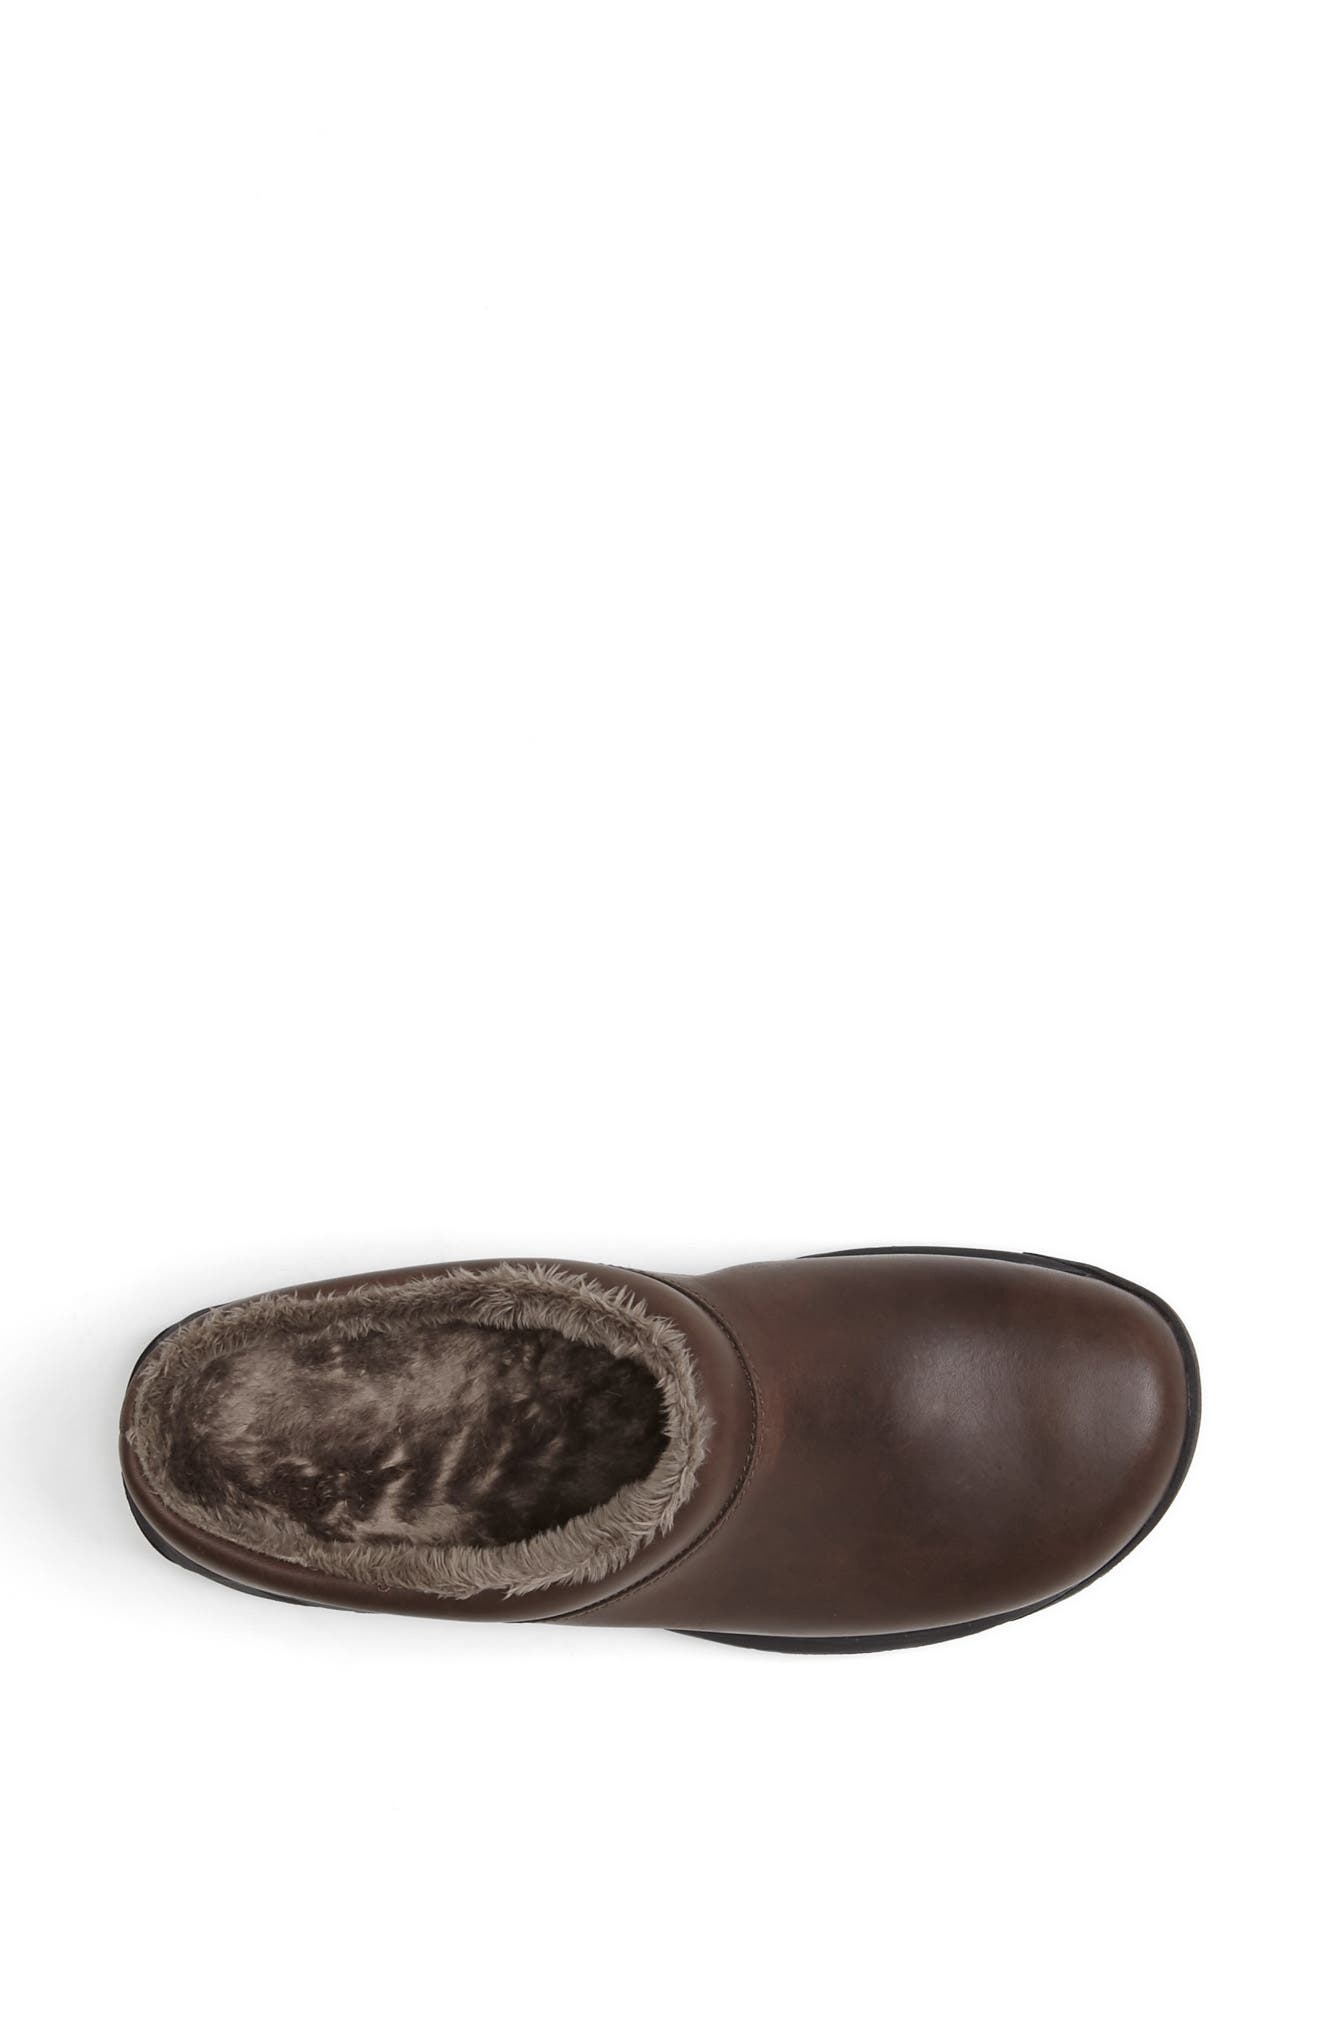 merrell shearling lined clogs